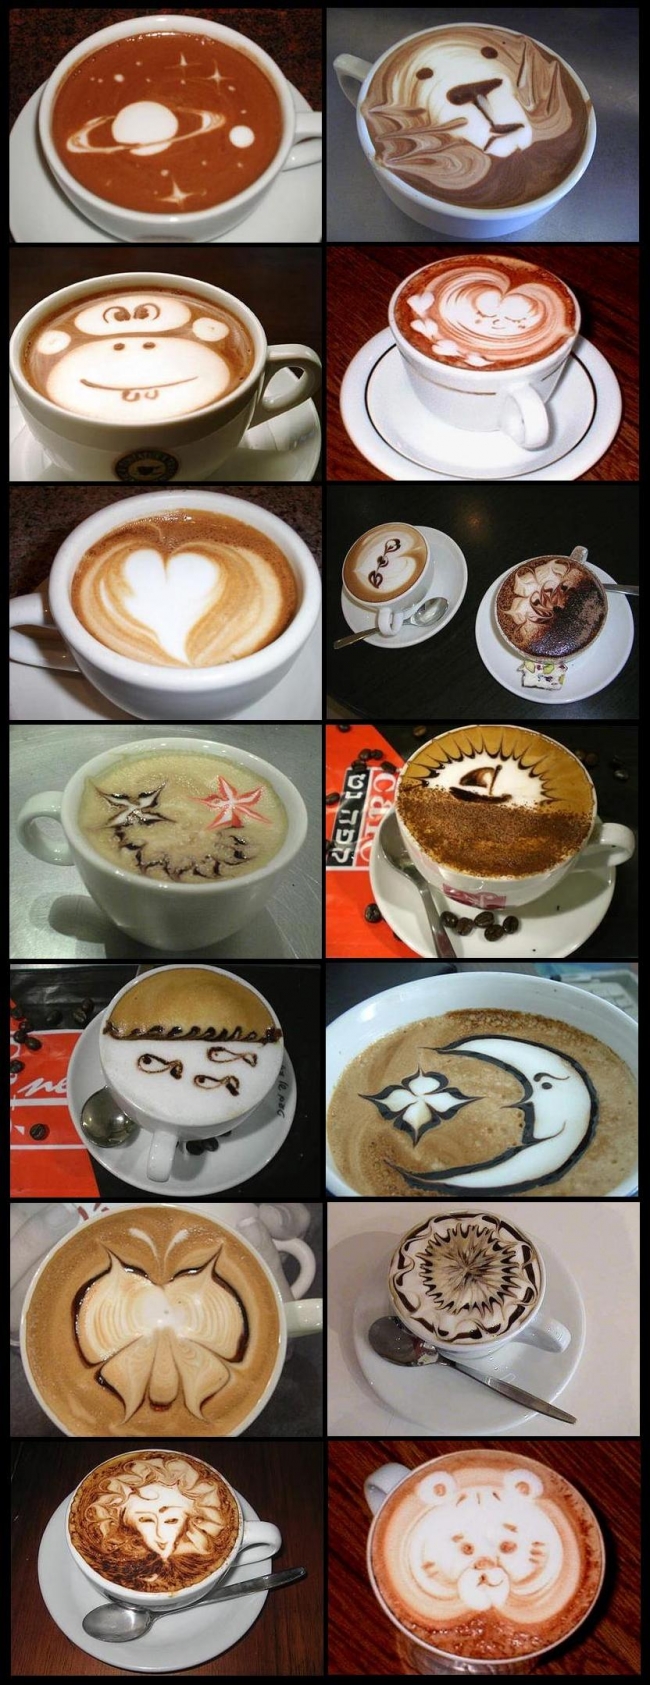 Amazing pictures made in the foam of coffee